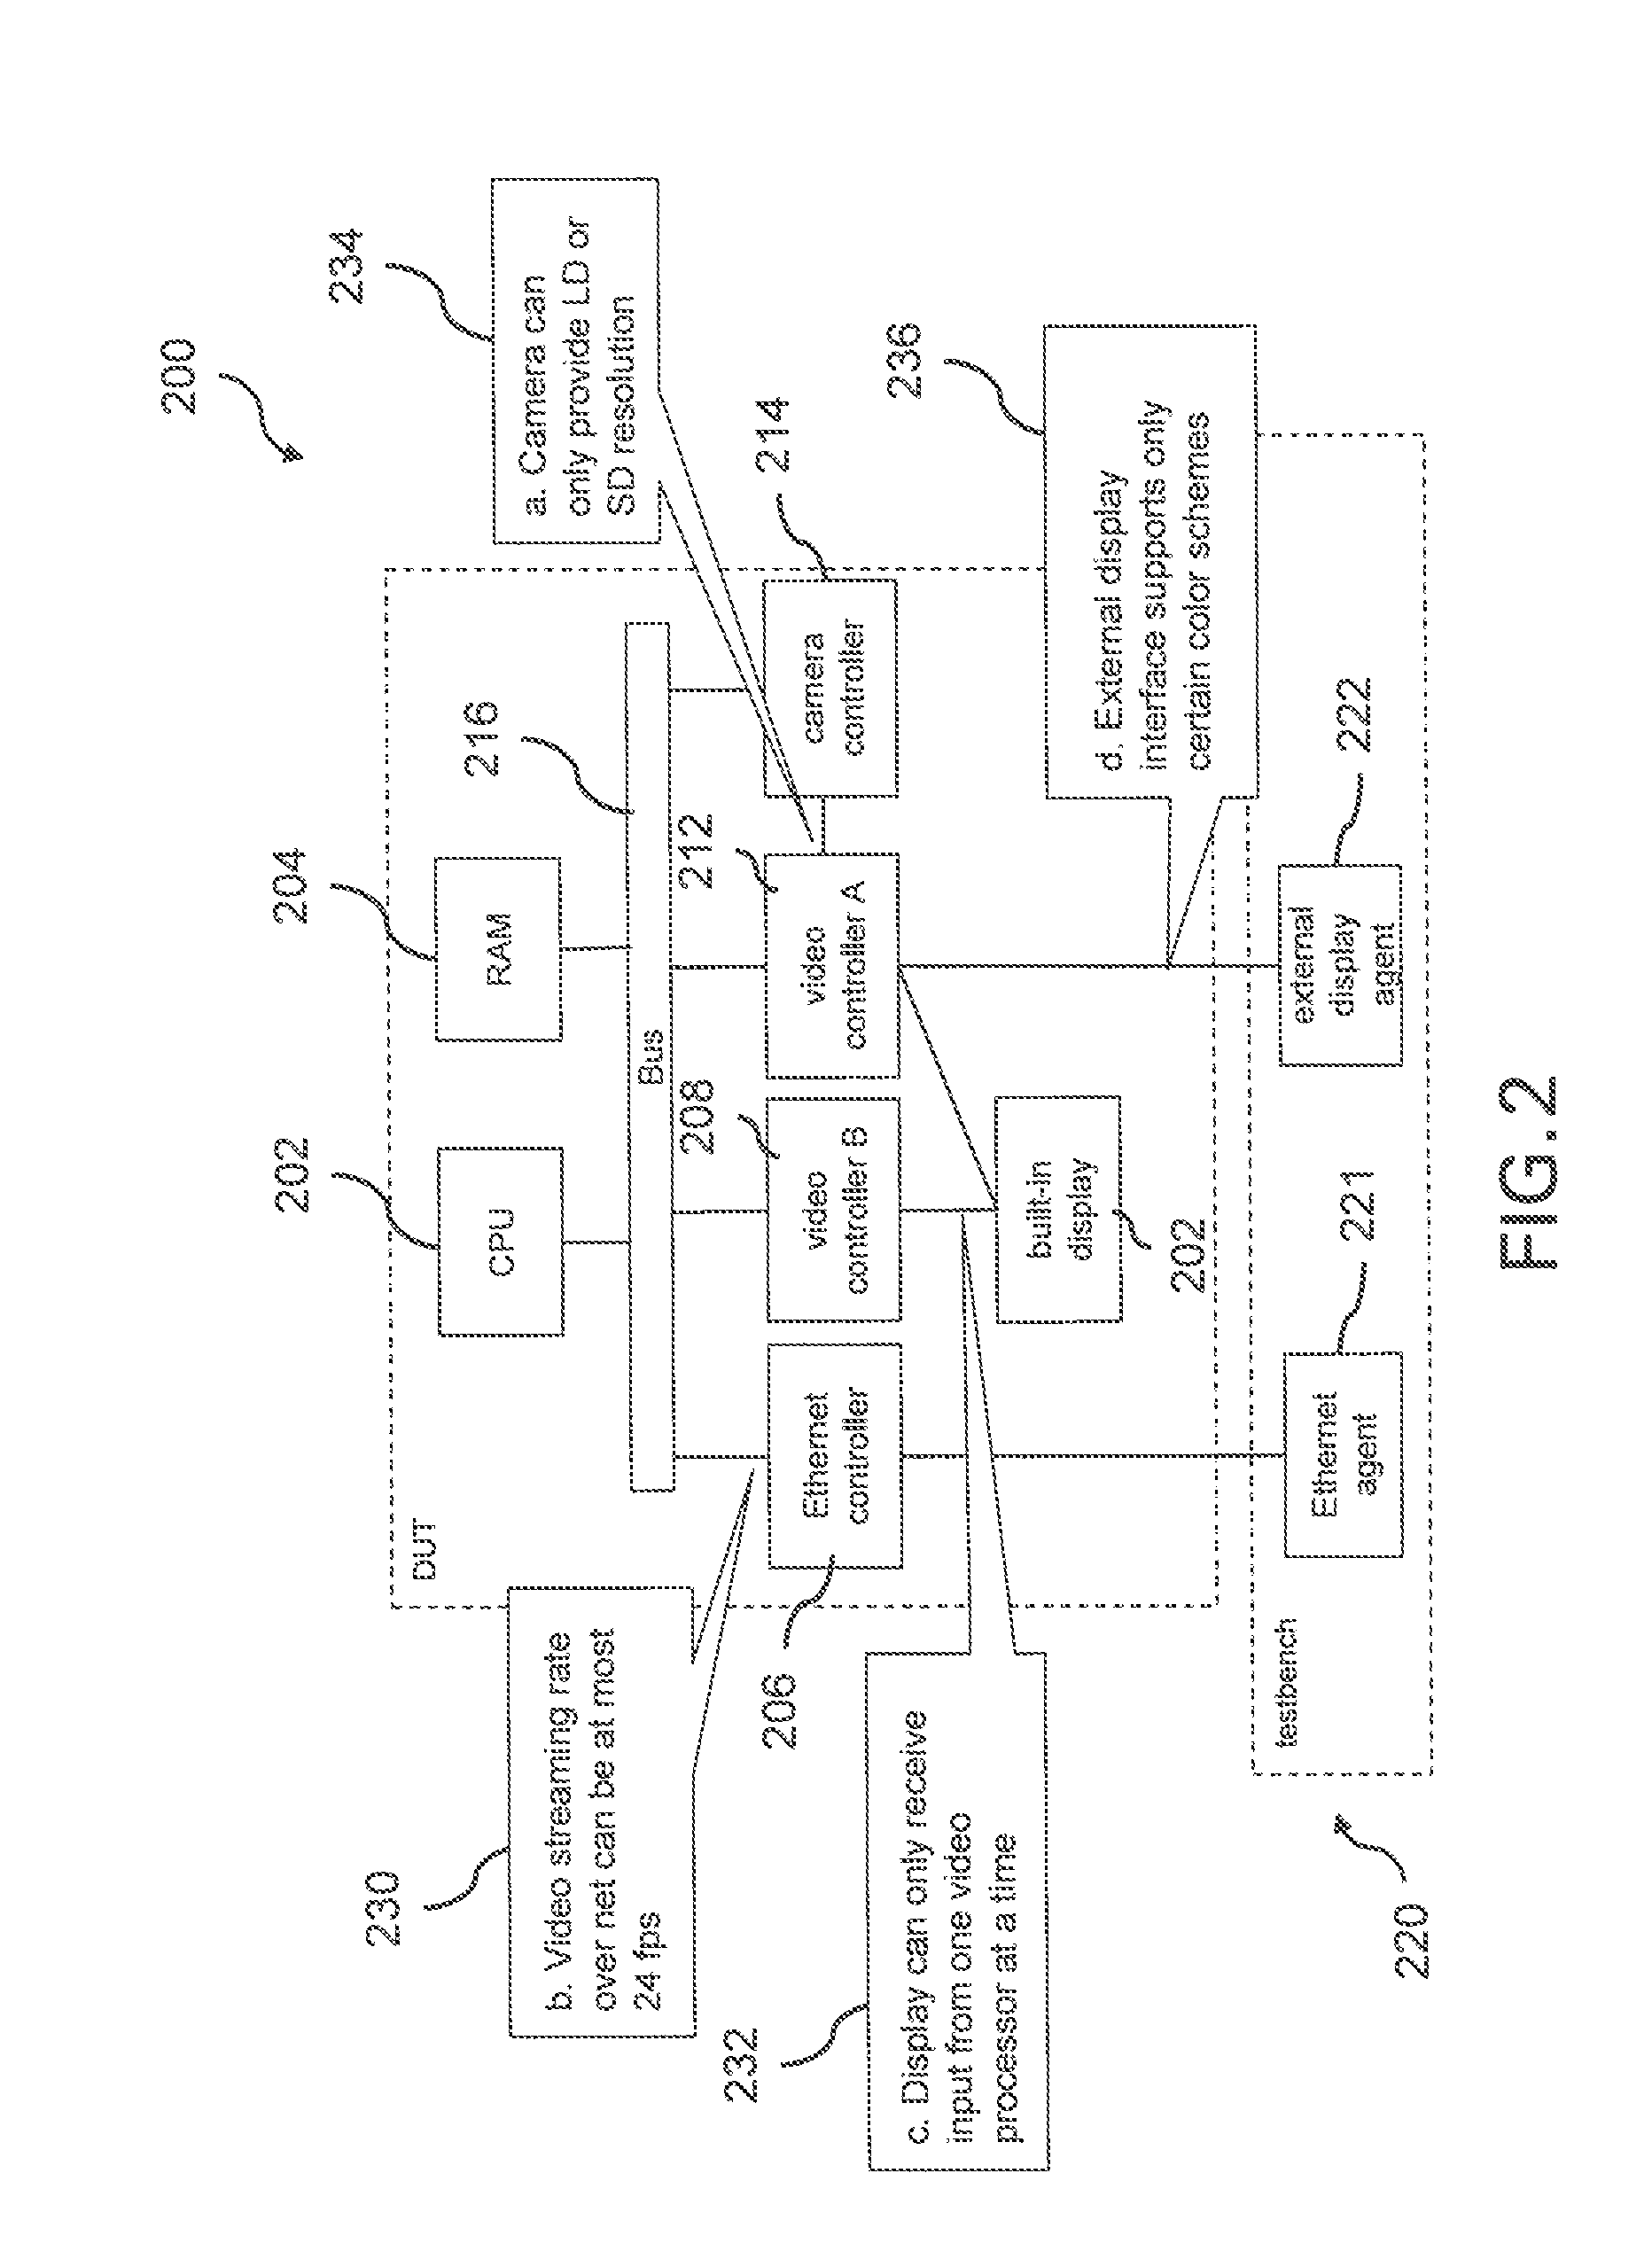 Systems and methods for automatically generating executable system level-tests from a partially specified scenario